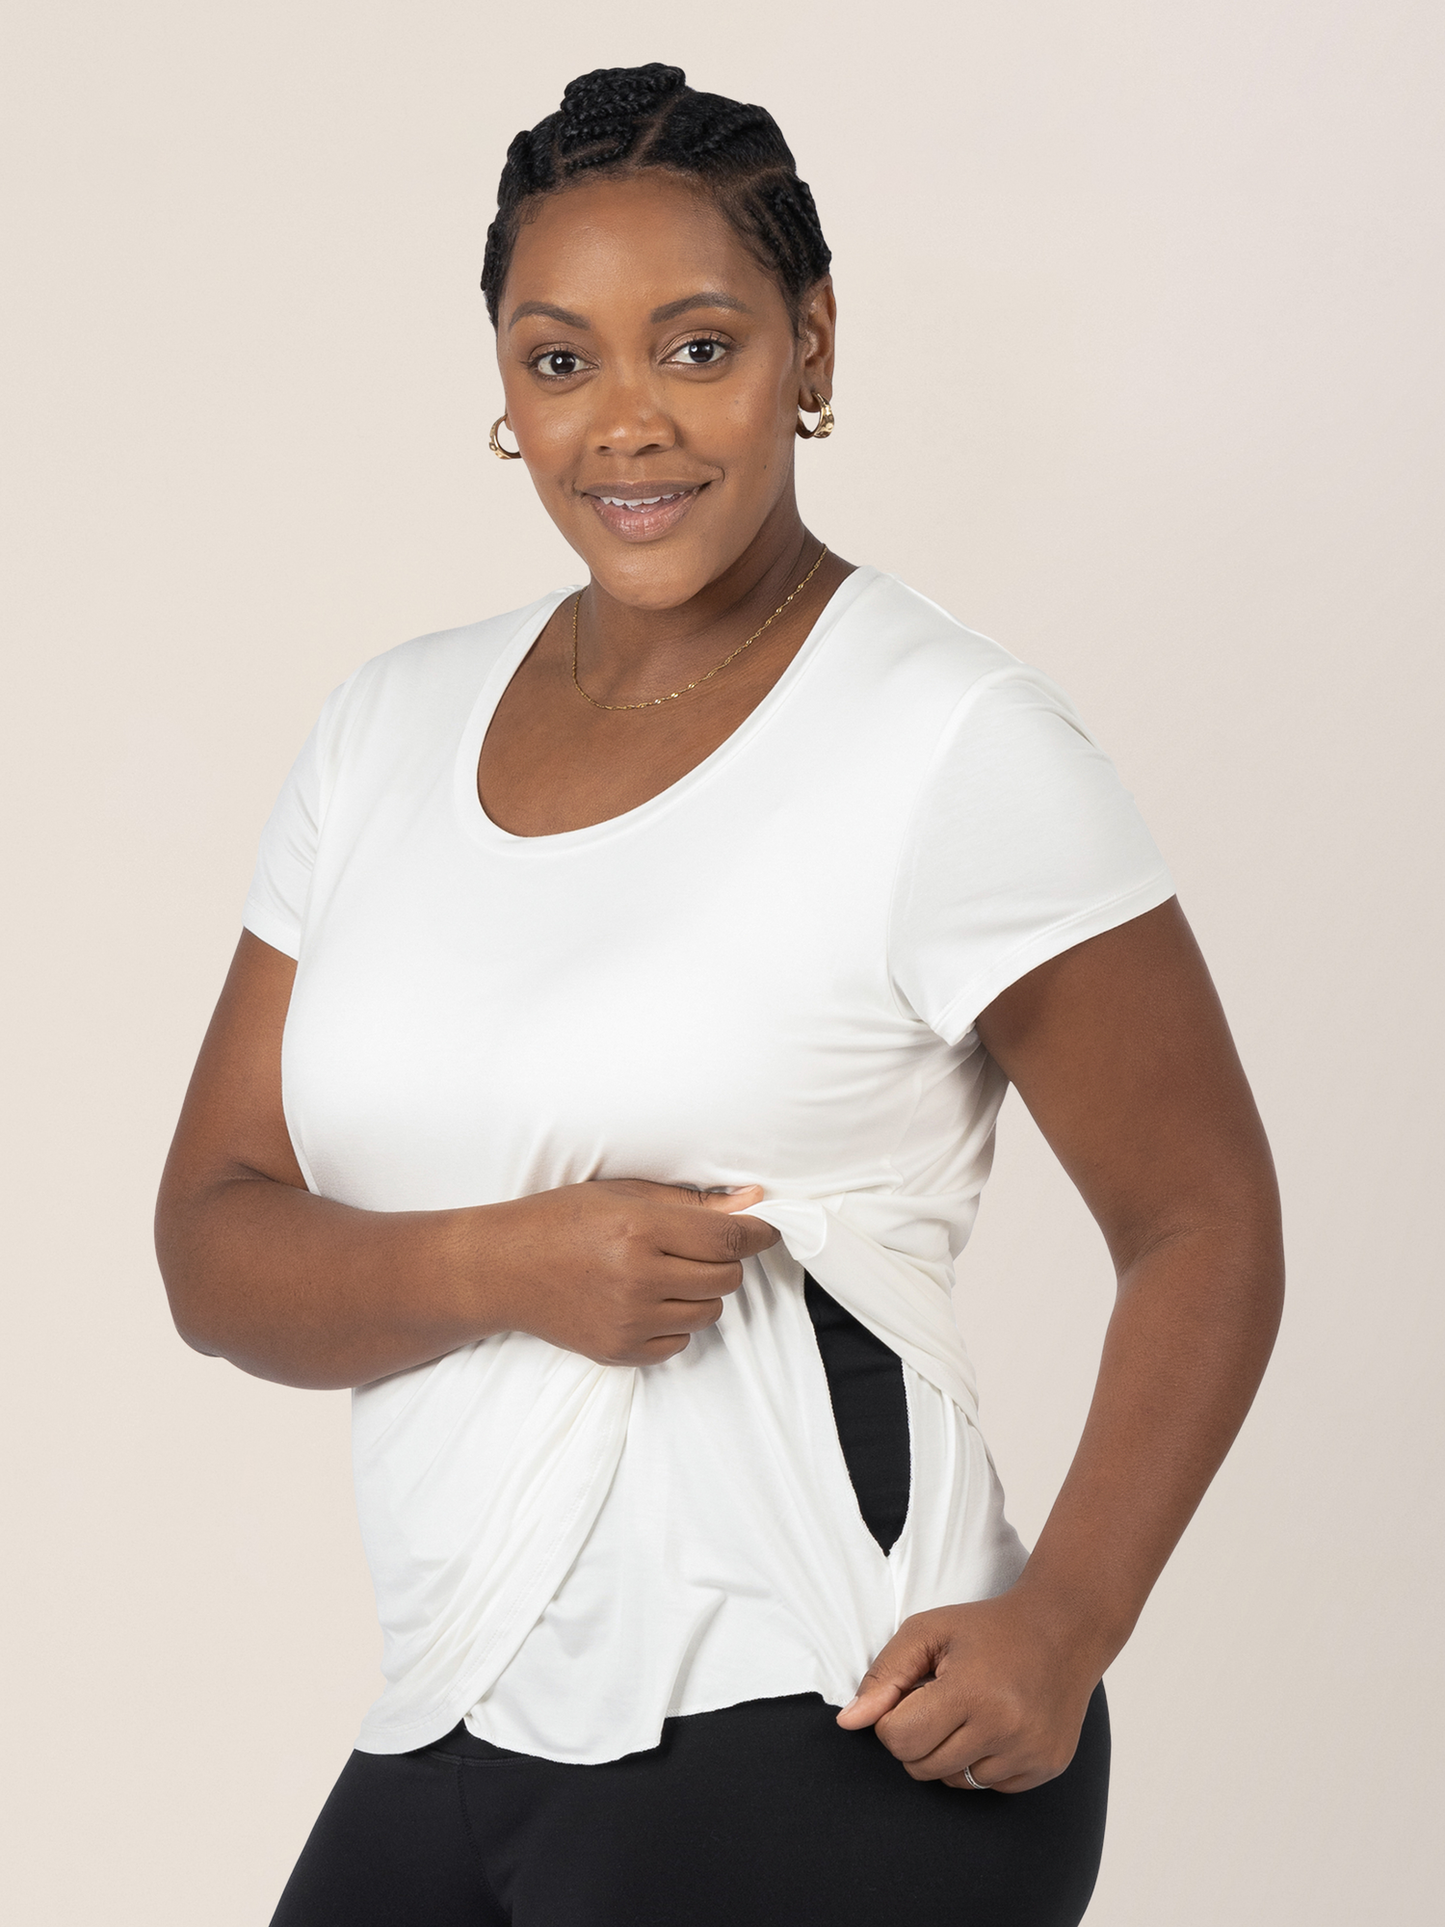 Model wearing the Everyday Maternity & Nursing T-shirt in White showing the easy pull aside nursing access panel.